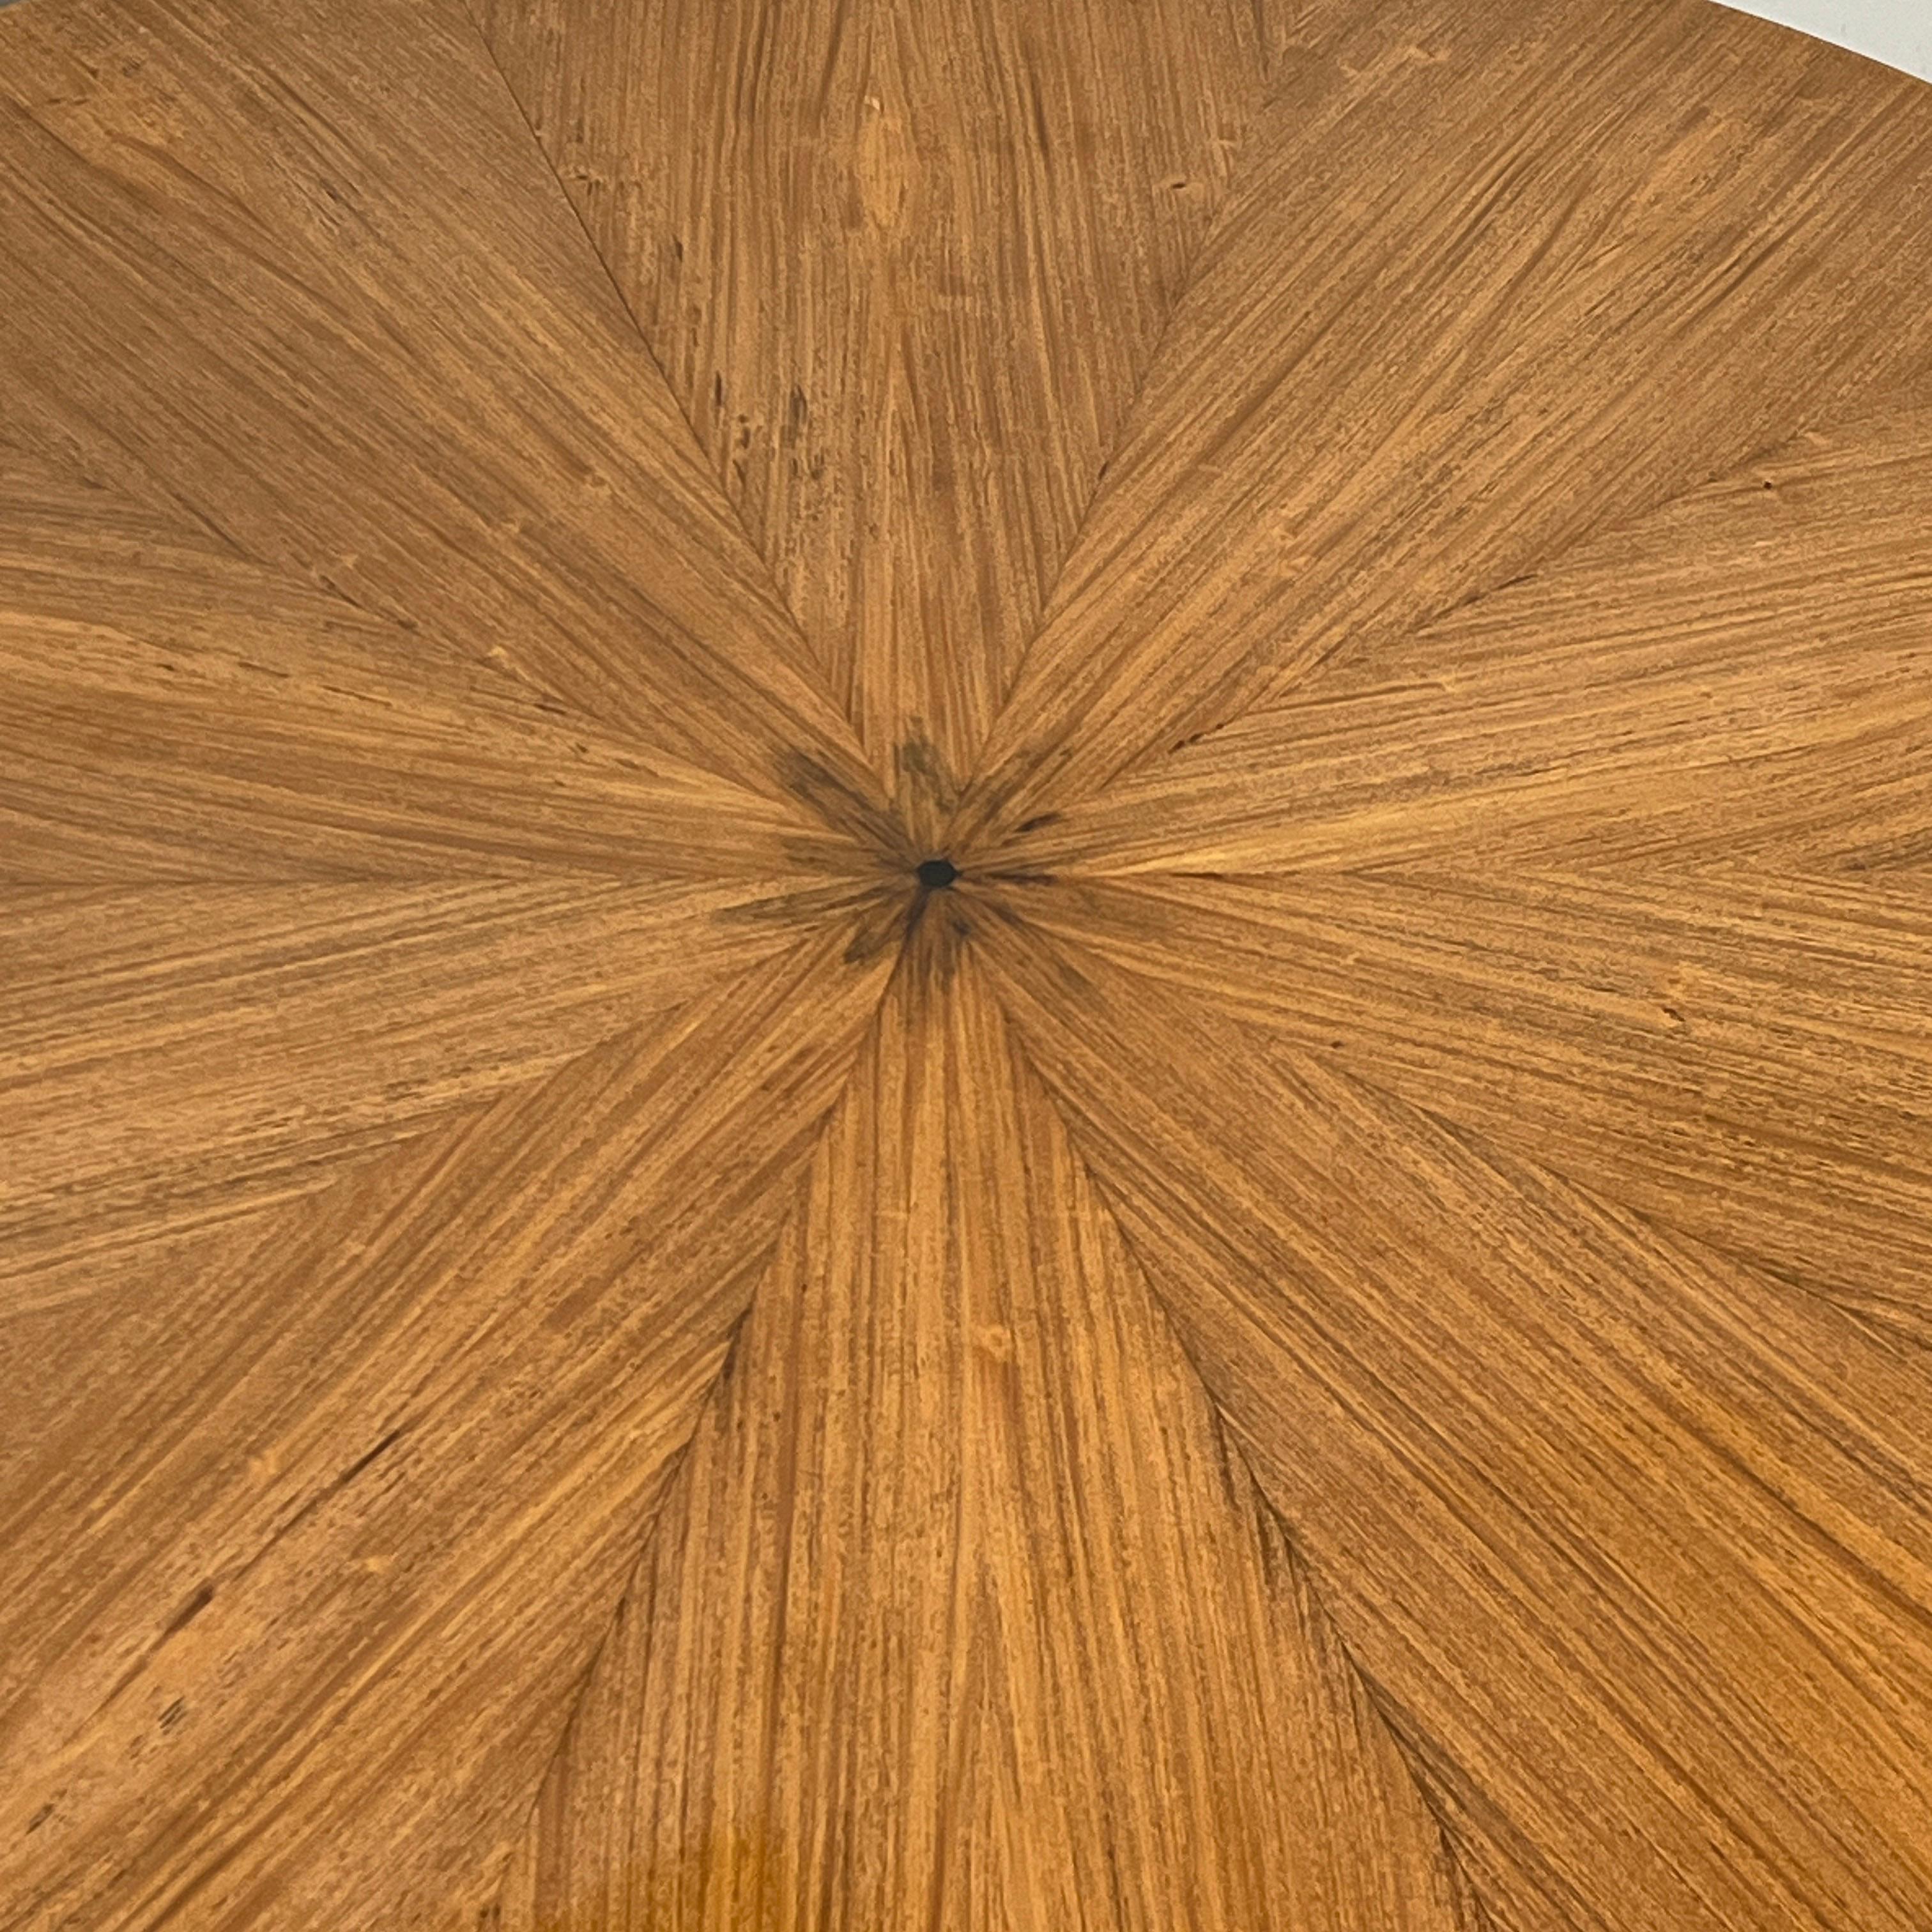 North American Radial Mahogany Expandable Dining Table in Manner of Karl Springer, Ca. 1970s